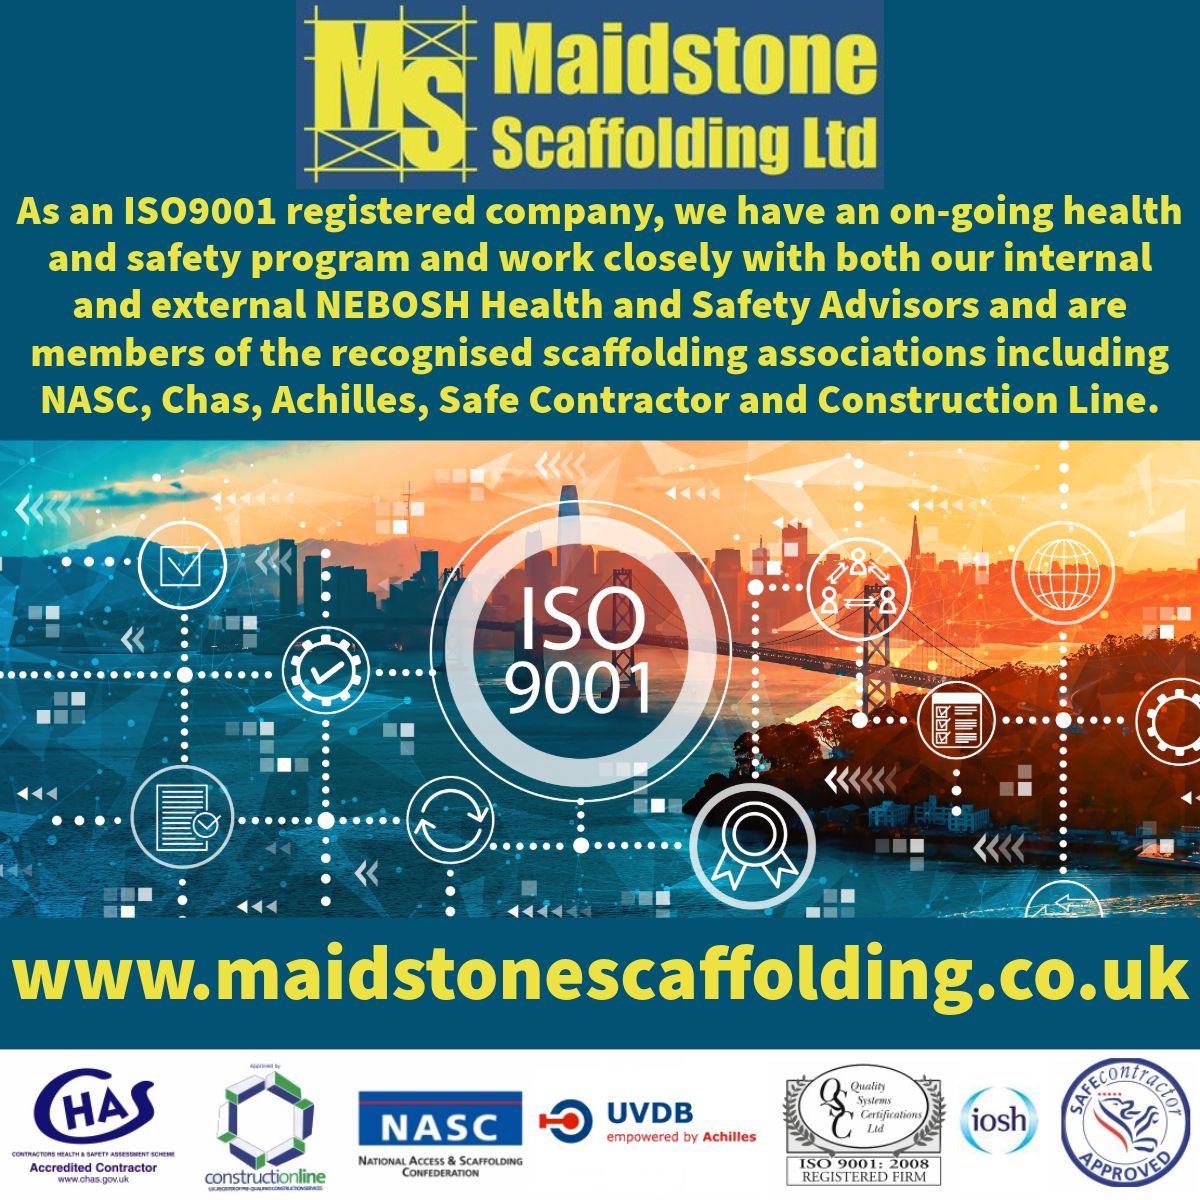 #scaffolding #residential #home #rebuild #safecontractor #maidstone #construction #builder #newhouse #scaffold #maidstone #maidstonekent #hgv #maidstonebusiness